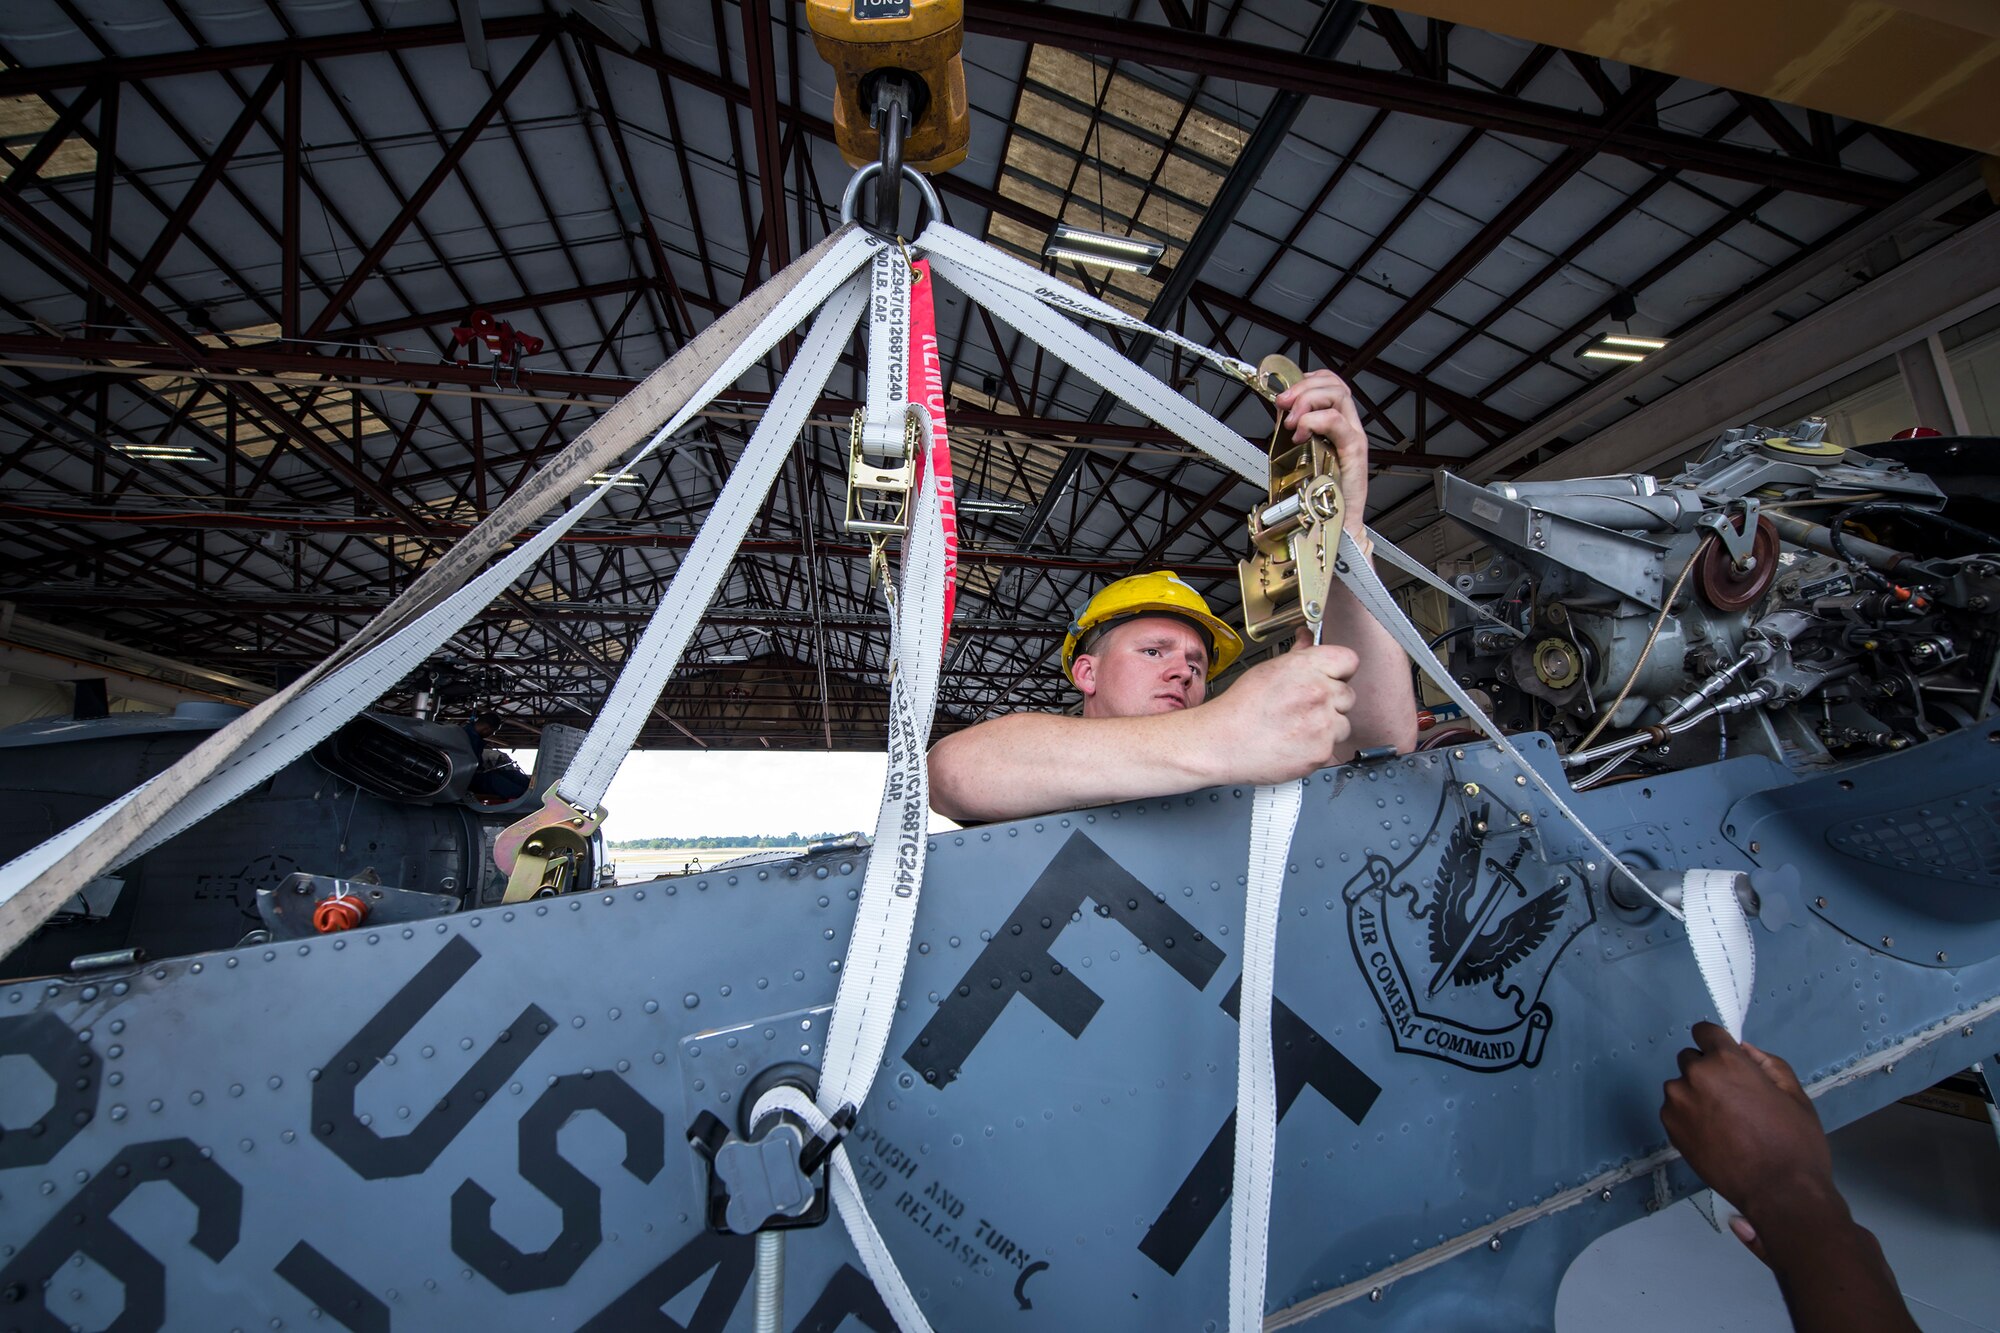 Staff Sgt. David Melton, 723d Aircraft Maintenance Squadron (AMXS) crew chief, attaches a pulley mechanism to an HH-60G Pave Hawk tail pylon, May 10, 2018, at Moody Air Force Base, Ga. Airmen from the 723d AMXS along with machinists from the Corpus Christi Army Depot conducted a full-structural tear down and restoration on an HH-60G Pave Hawk. Once the aircraft was torn down, Airmen and the machinists performed repairs on all of its components prior to resembling it. (U.S. Air Force photo by Airman 1st Class Eugene Oliver)